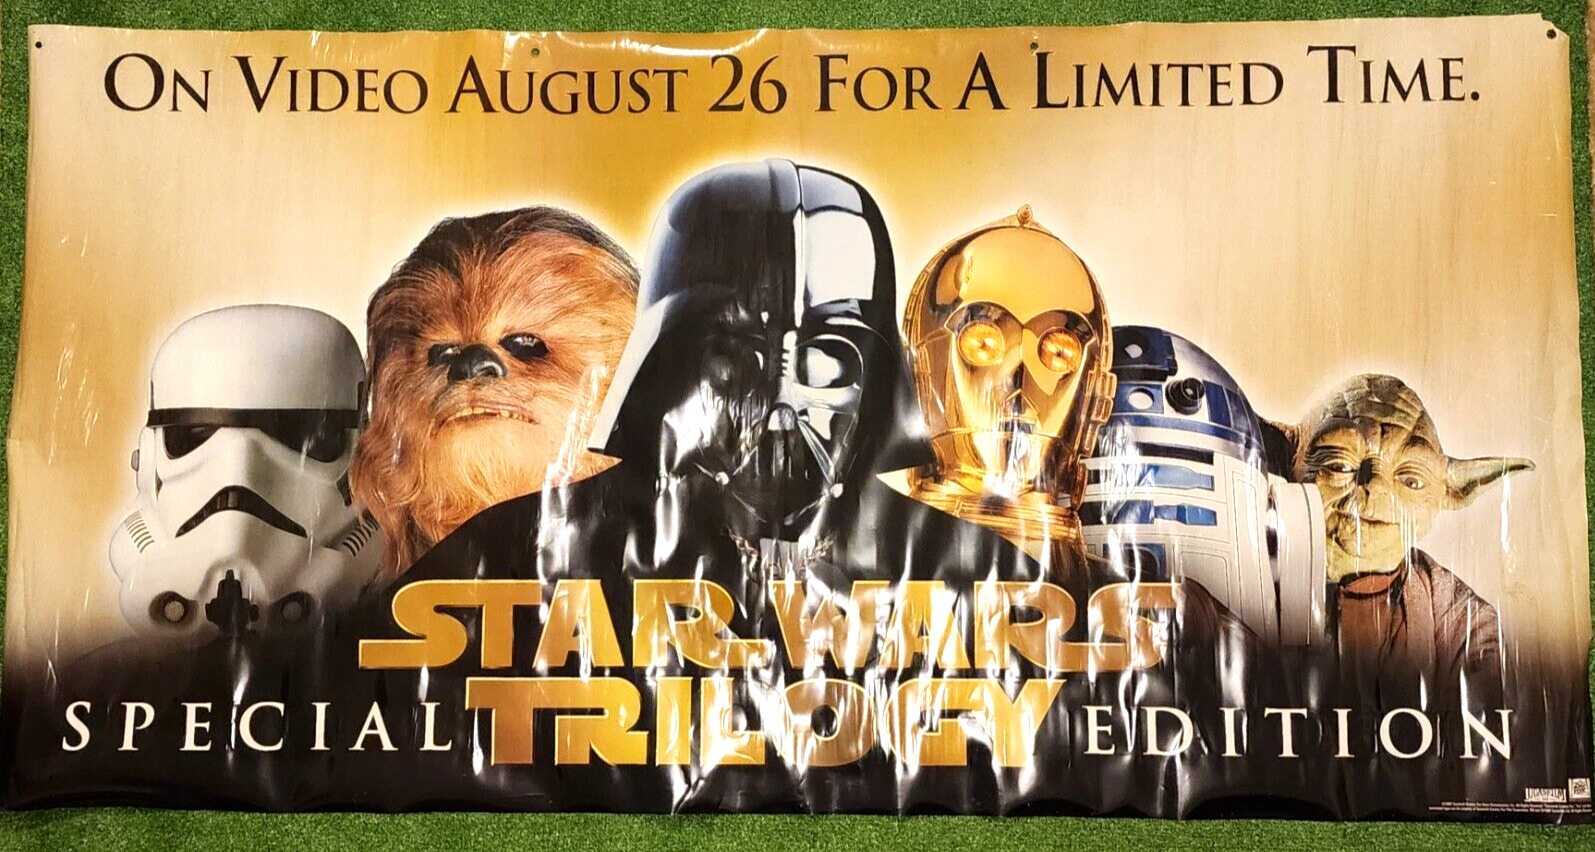 1997 Star Wars Trilogy Special Limited Edition Vinyl Poster Retail Banner 36x70